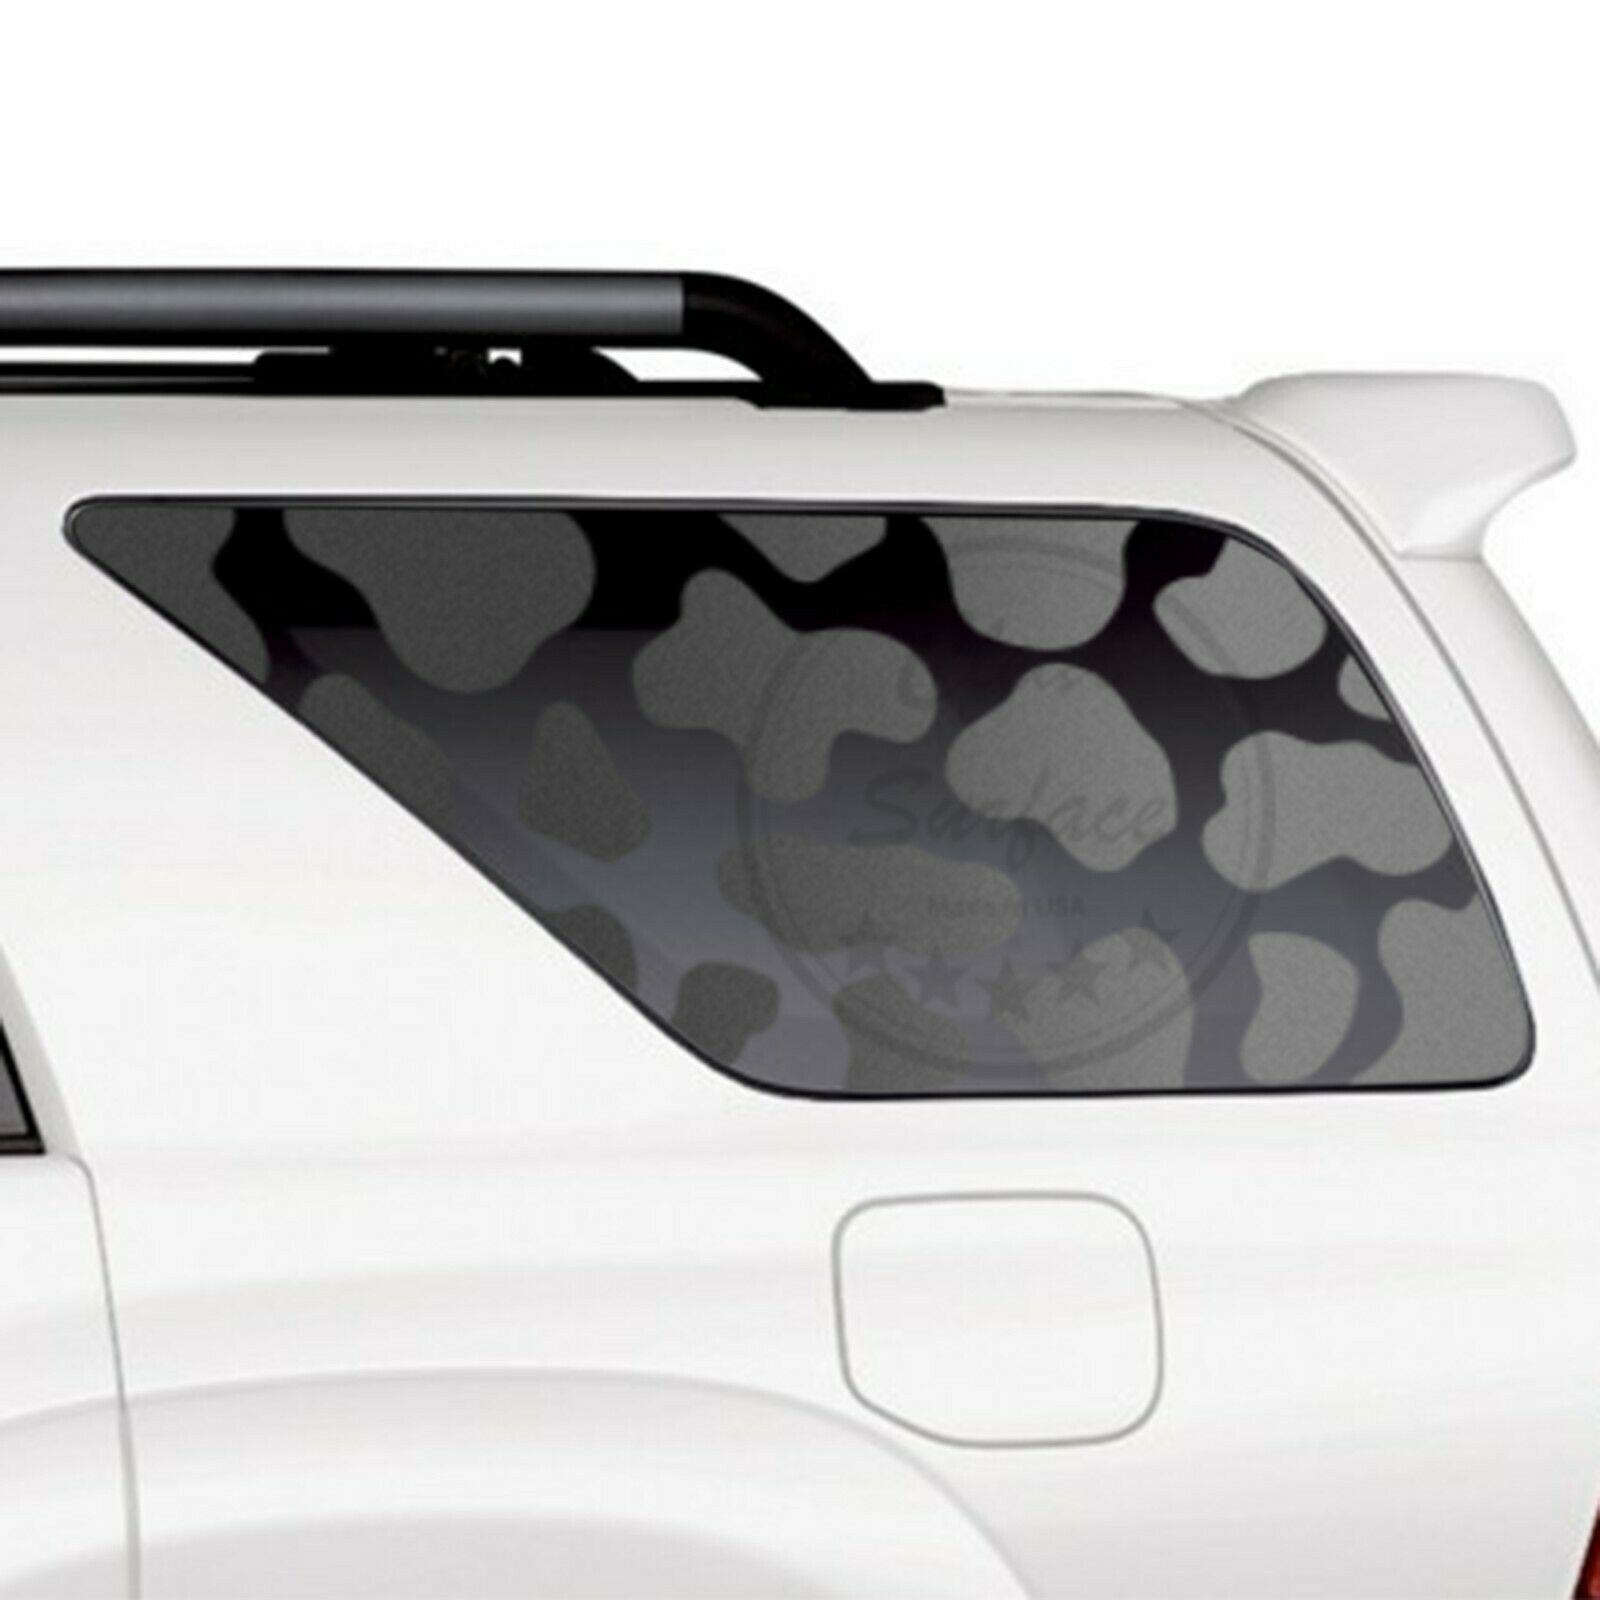 Fits 2003 - 2009 Toyota 4Runner Animal Cow Spot Print Rear Window Decal Stickers - $29.99